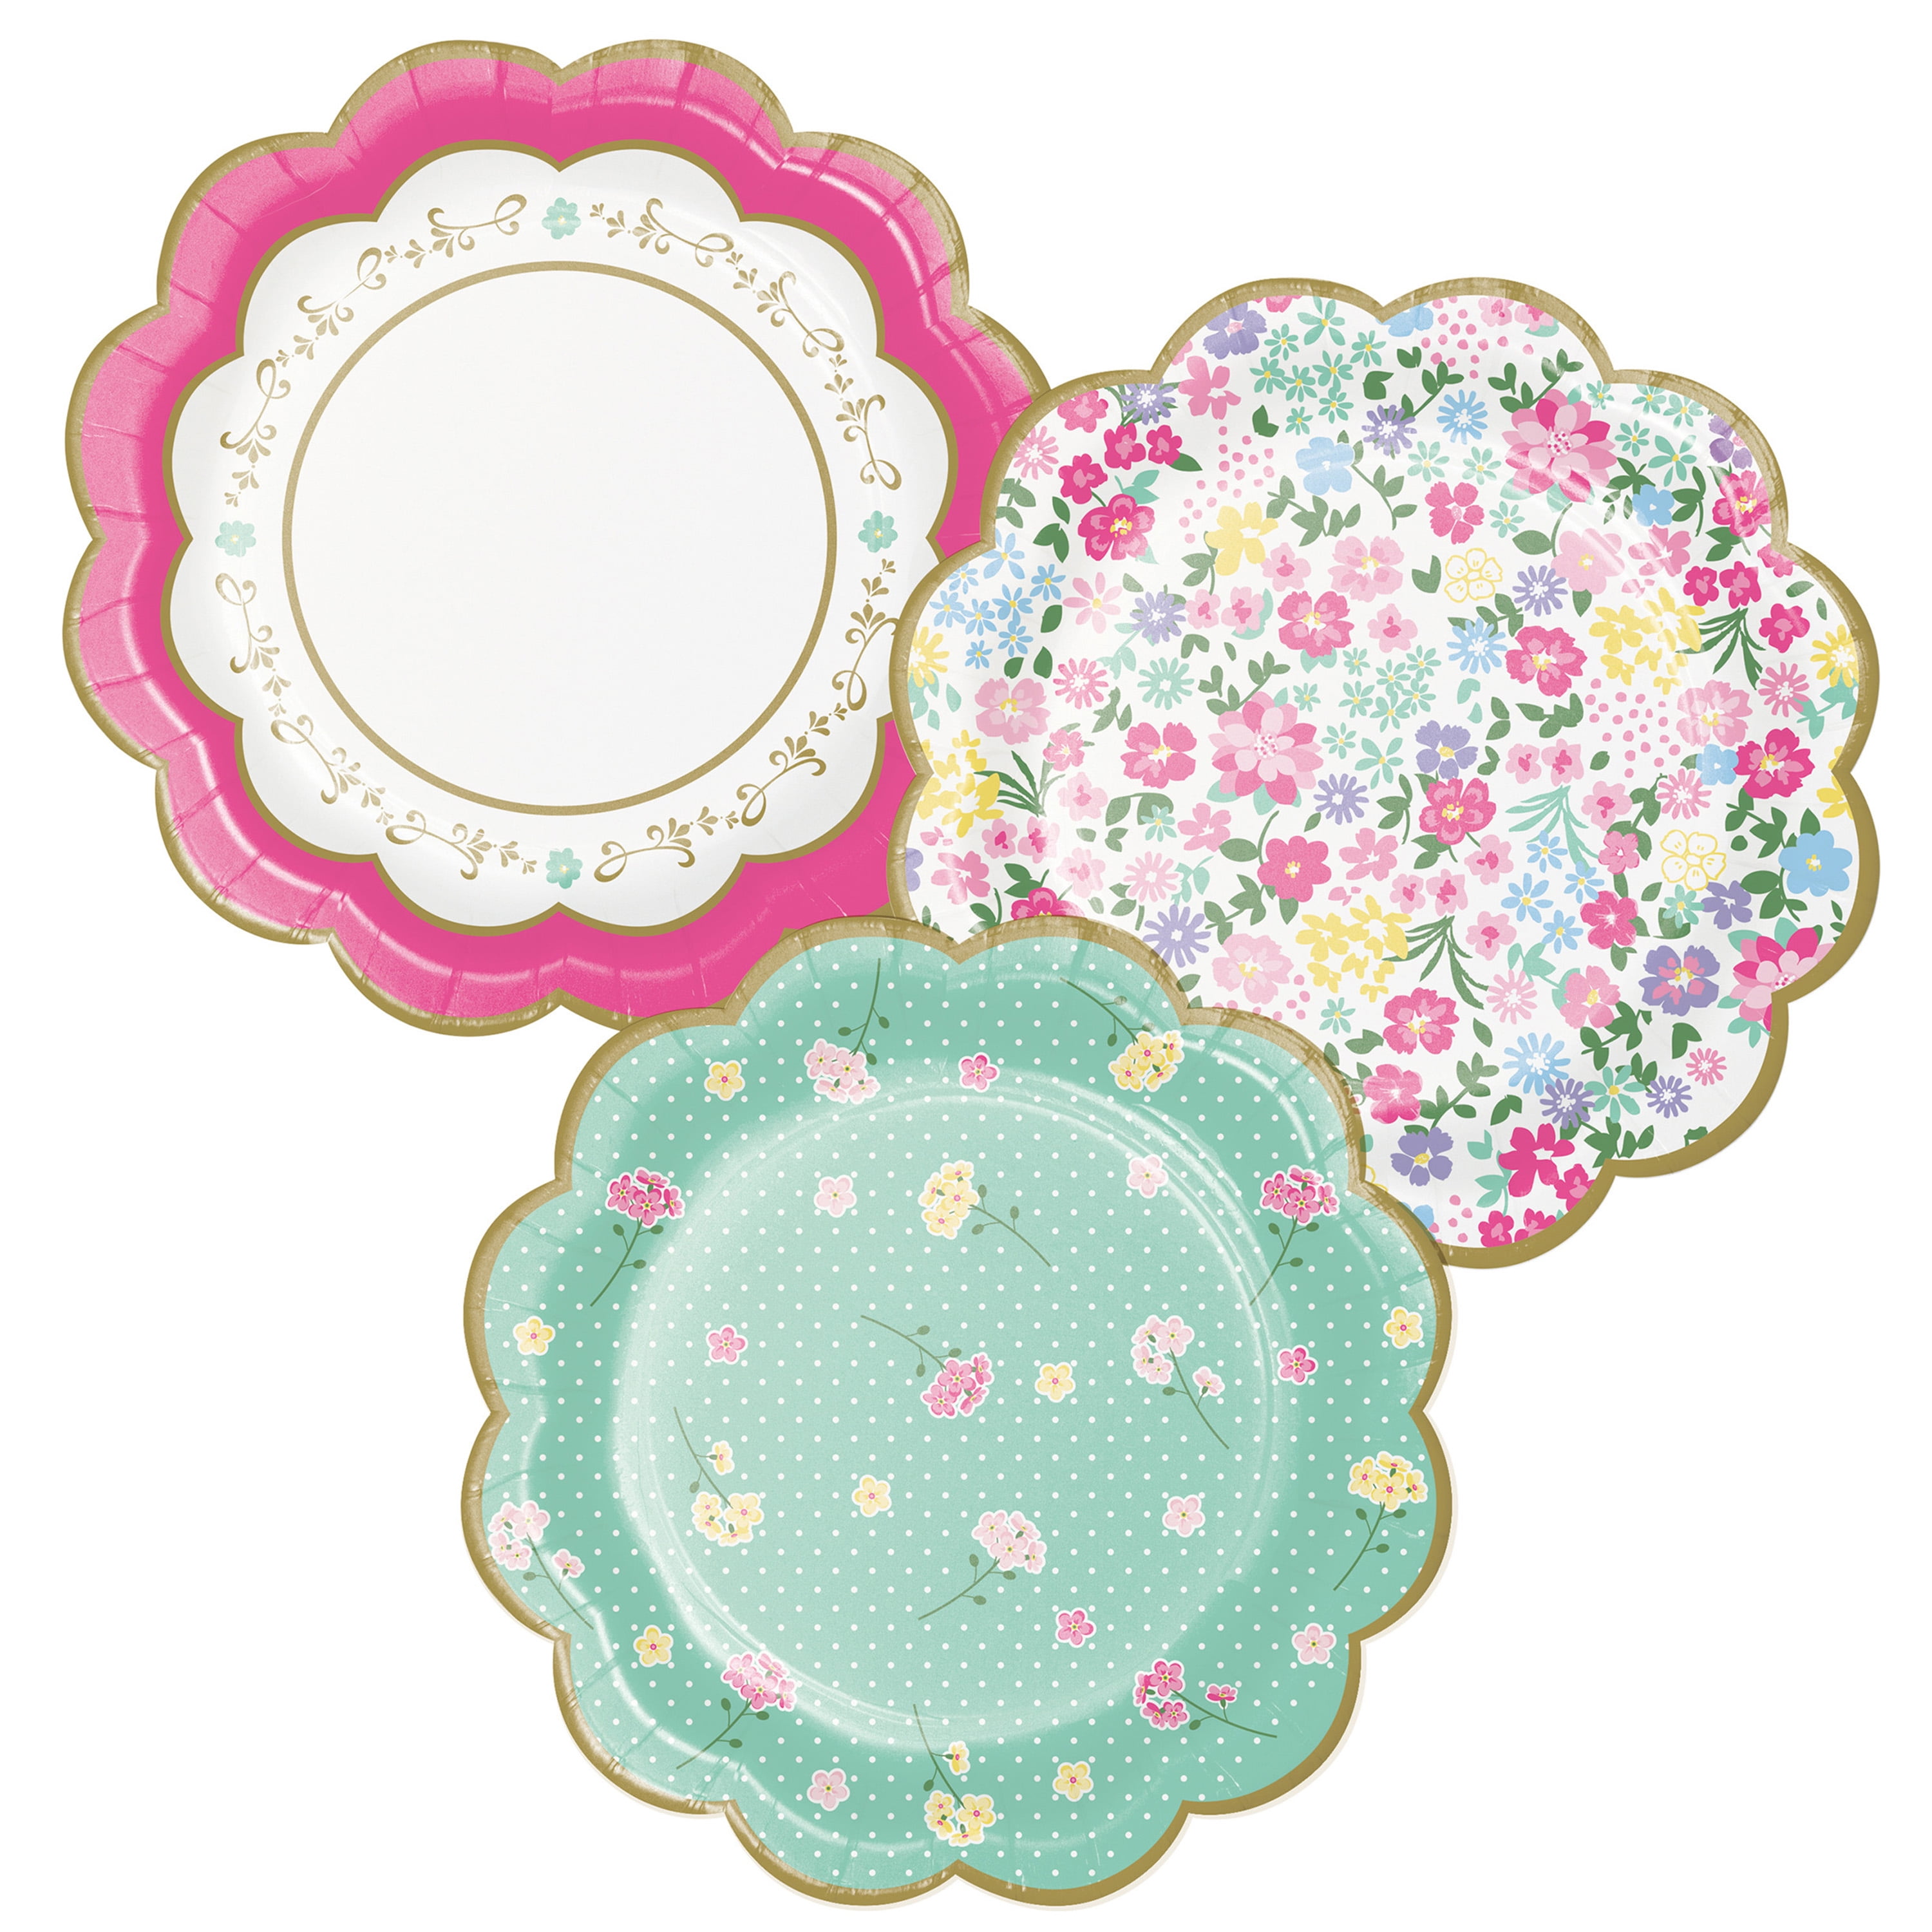 24 Round 9 in Assorted Floral Disposable Paper Plates Scalloped Trim